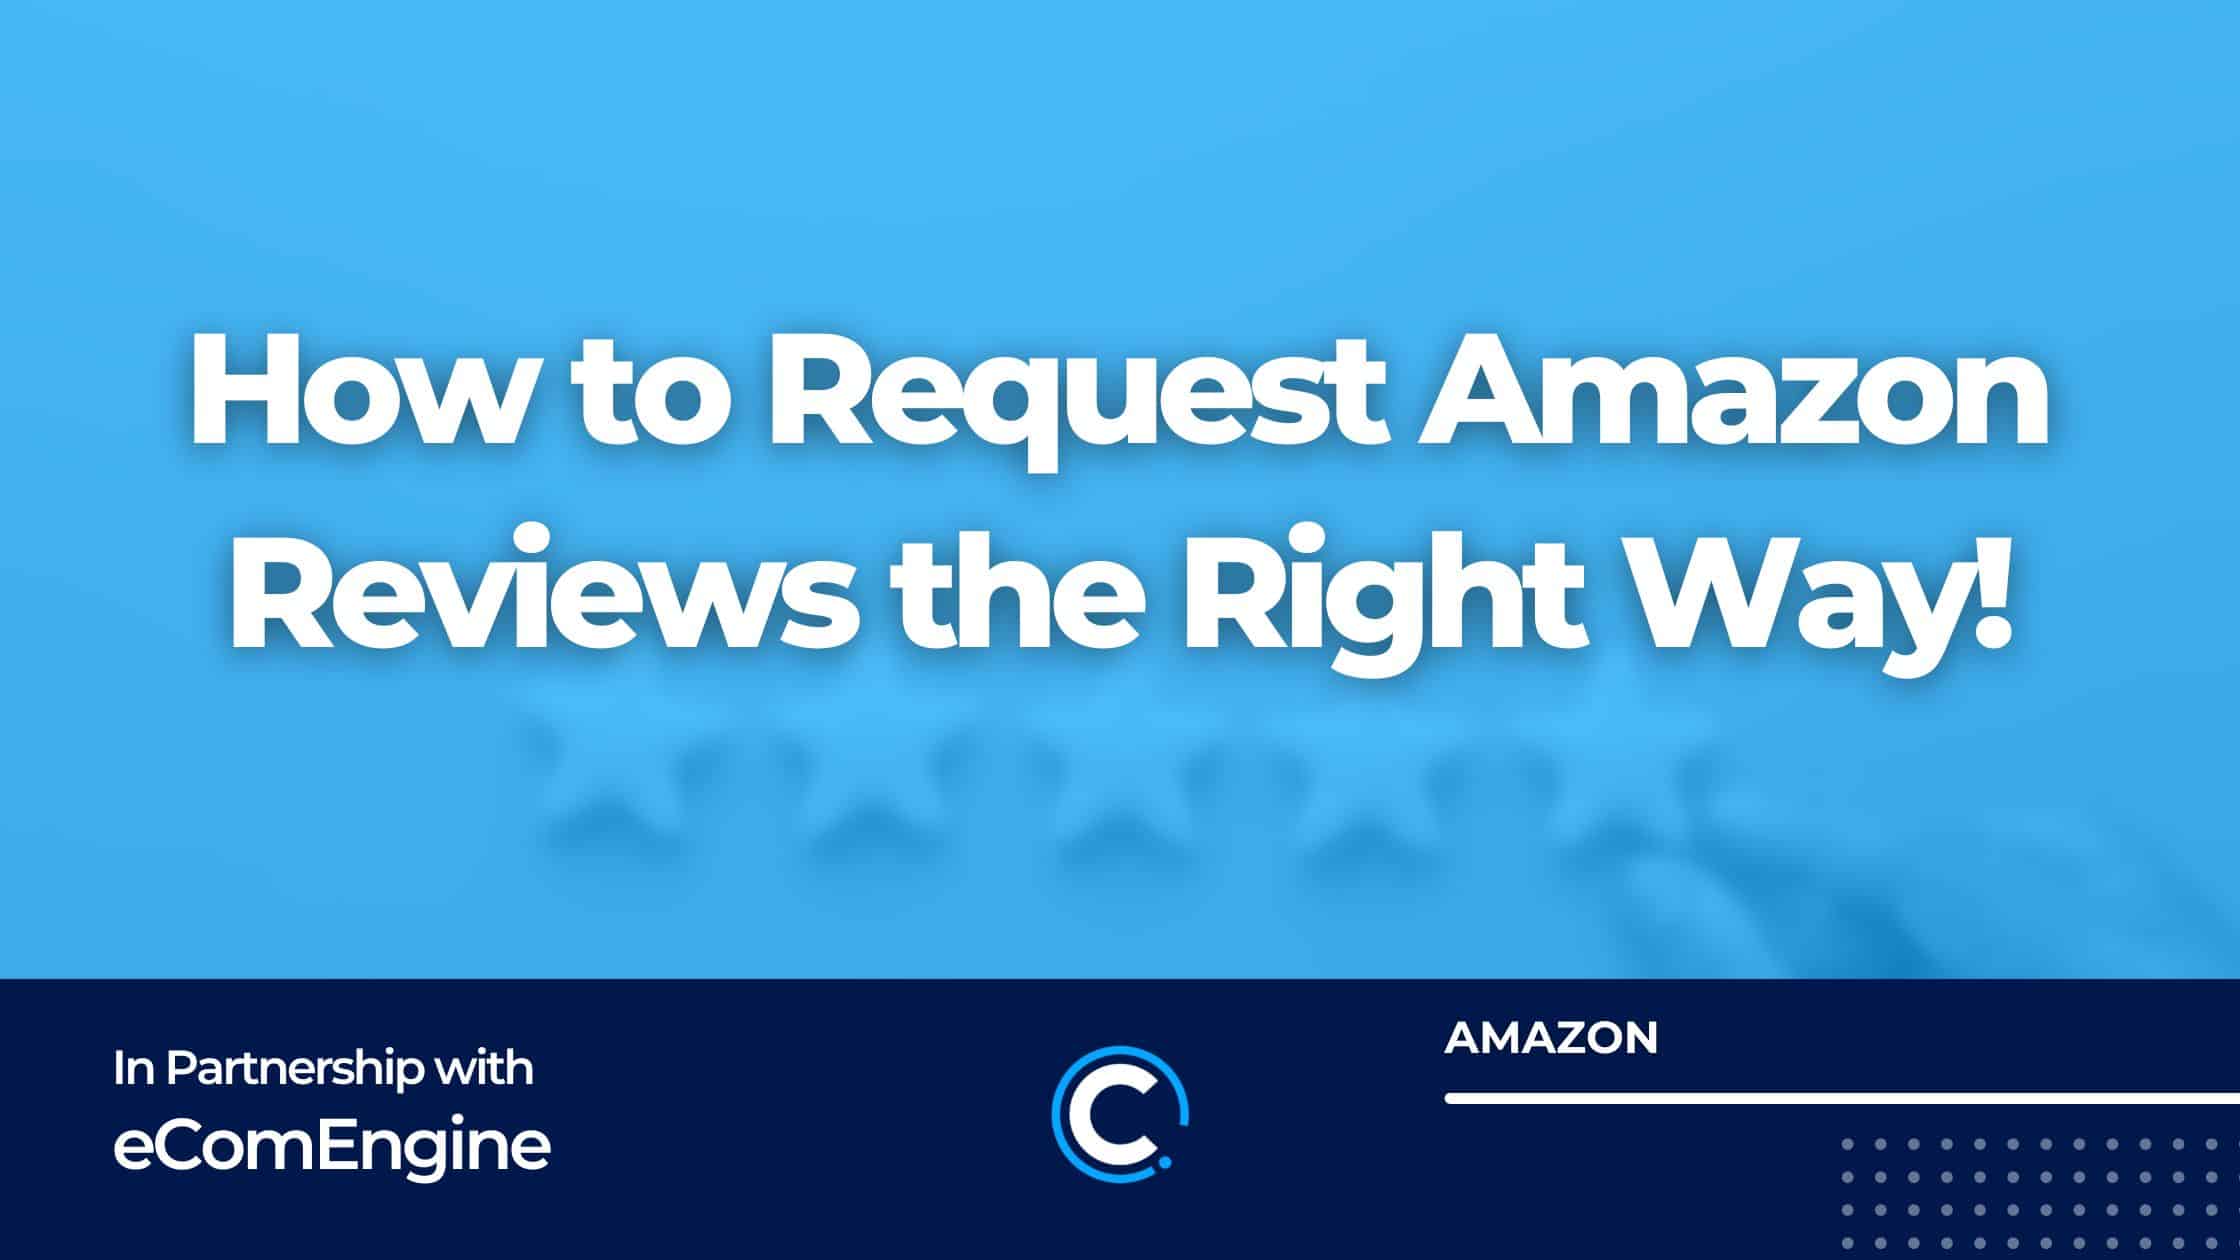 How to Request Amazon Reviews the Right Way!